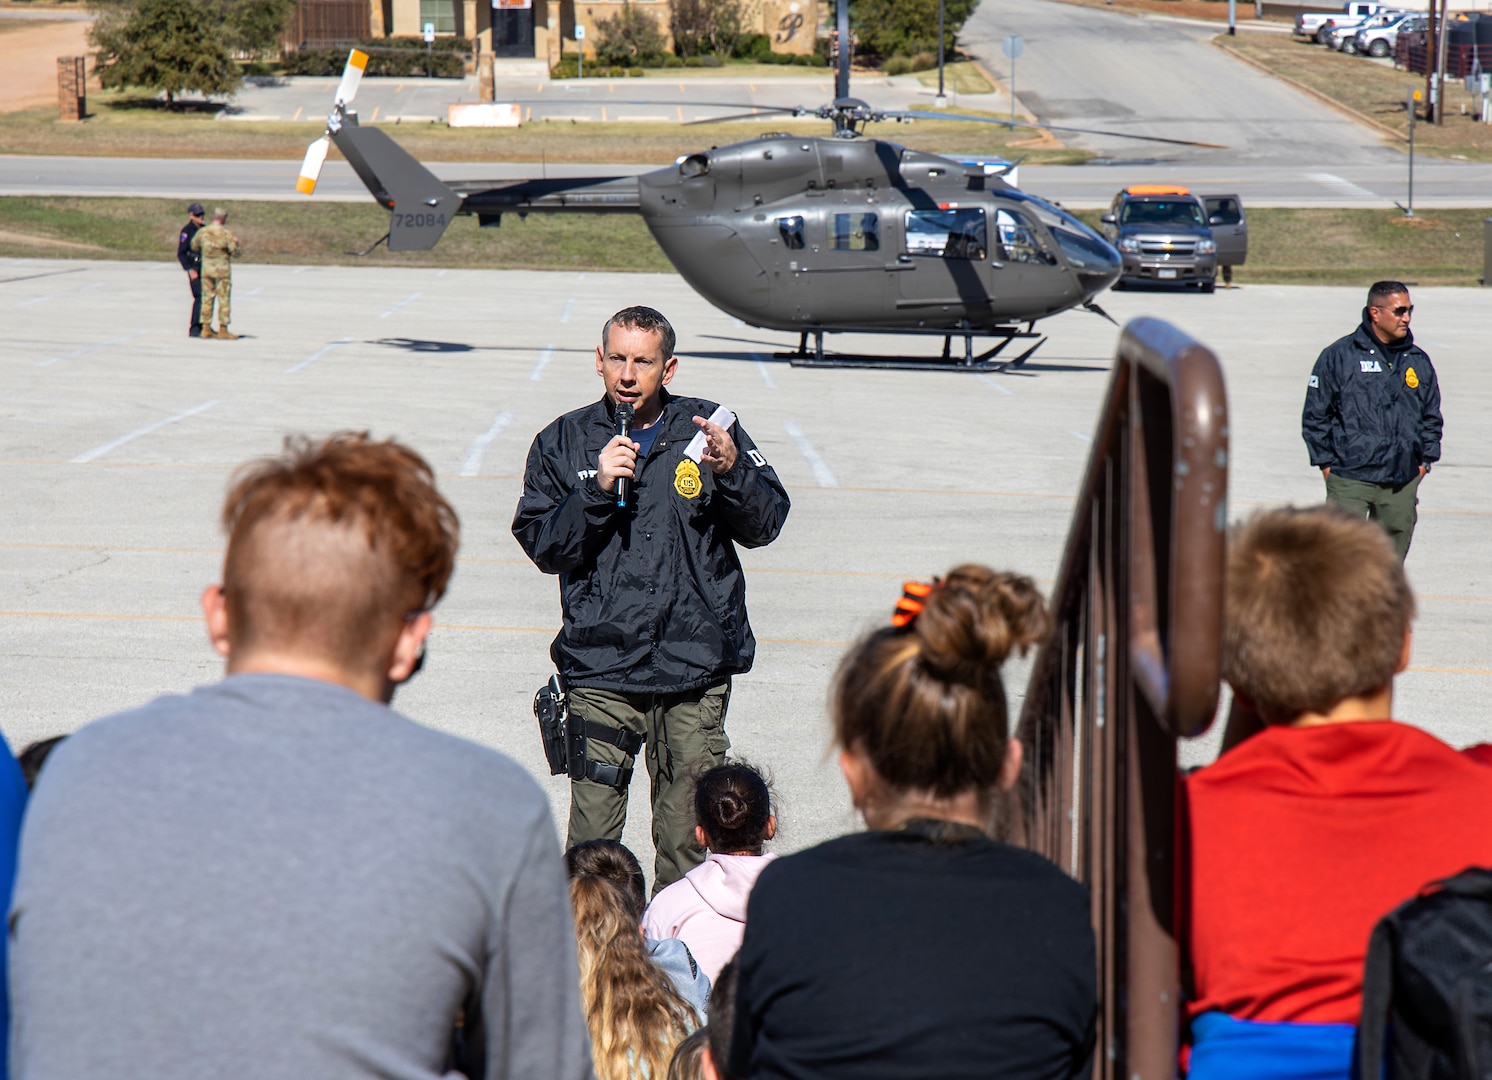 The Texas National Guard Joint Counterdrug Task Force flew Drug Enforcement Administration special agents in an Army National Guard Lakota helicopter to five Austin-area schools to talk about drug abuse prevention and awareness.